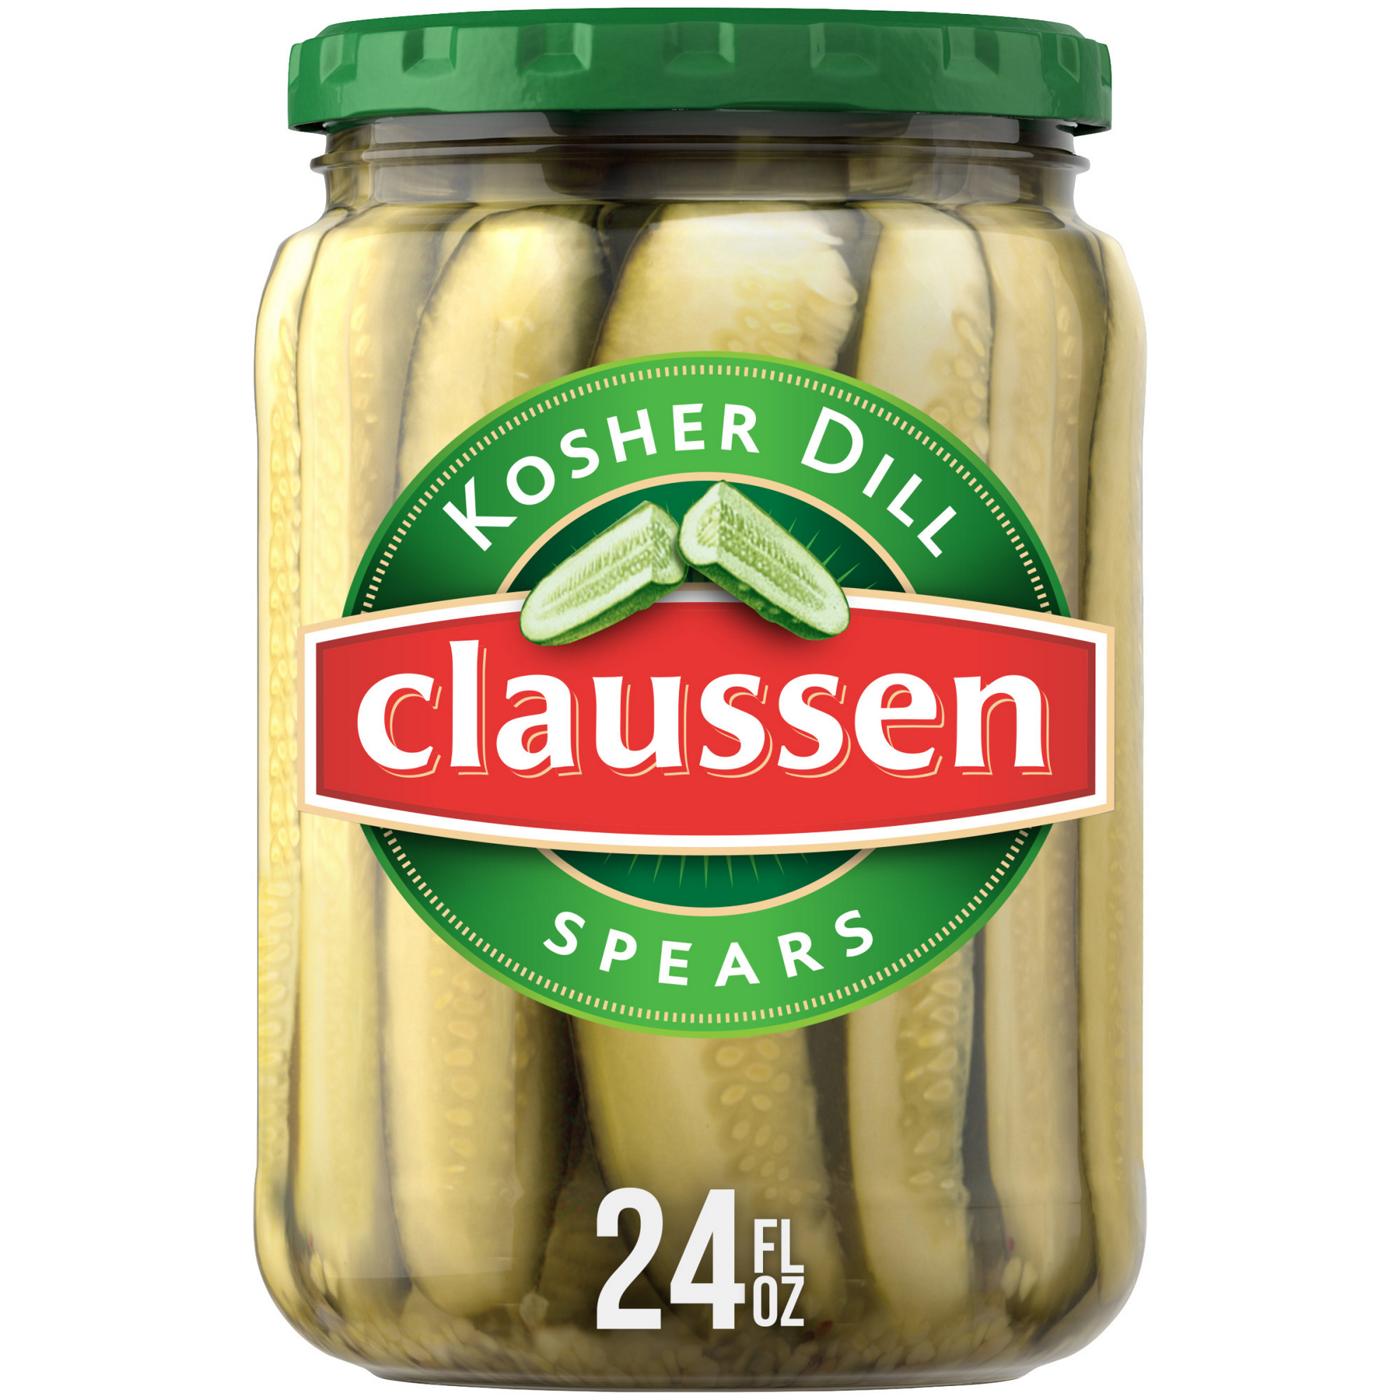 Claussen Kosher Dill Spears; image 1 of 9